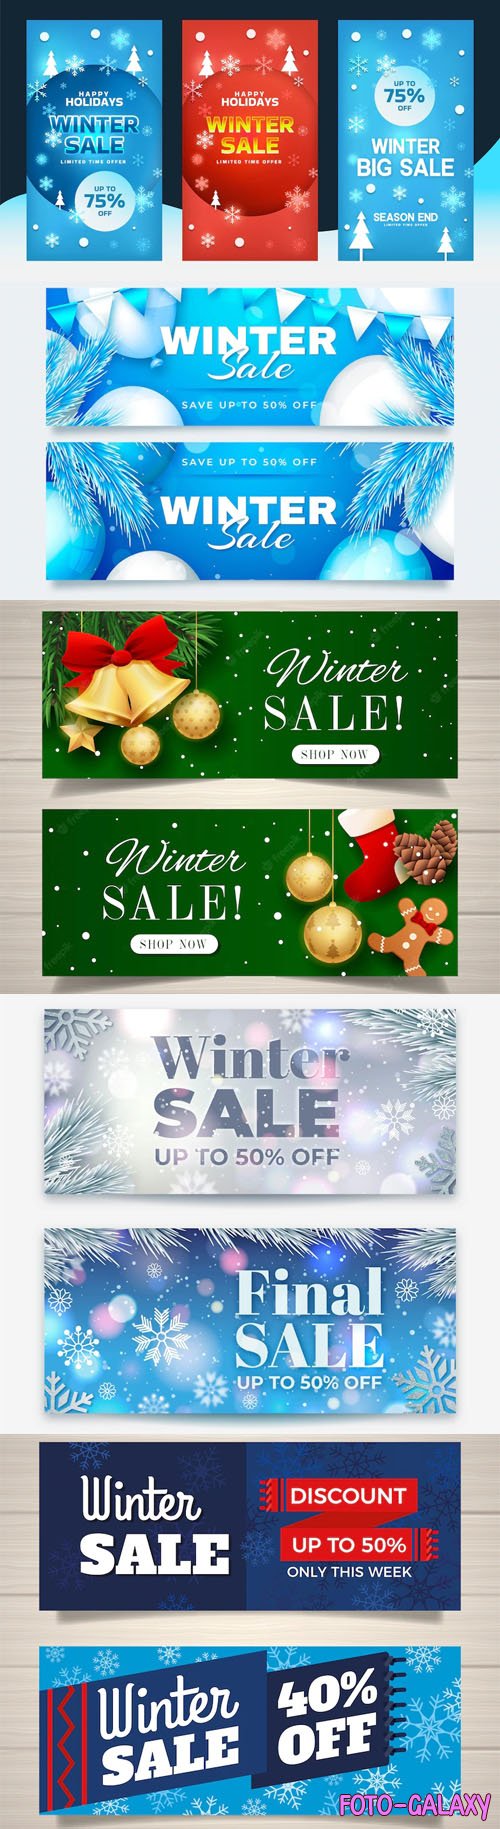 Realistic Winter Sales Web Banners - Vector Templates